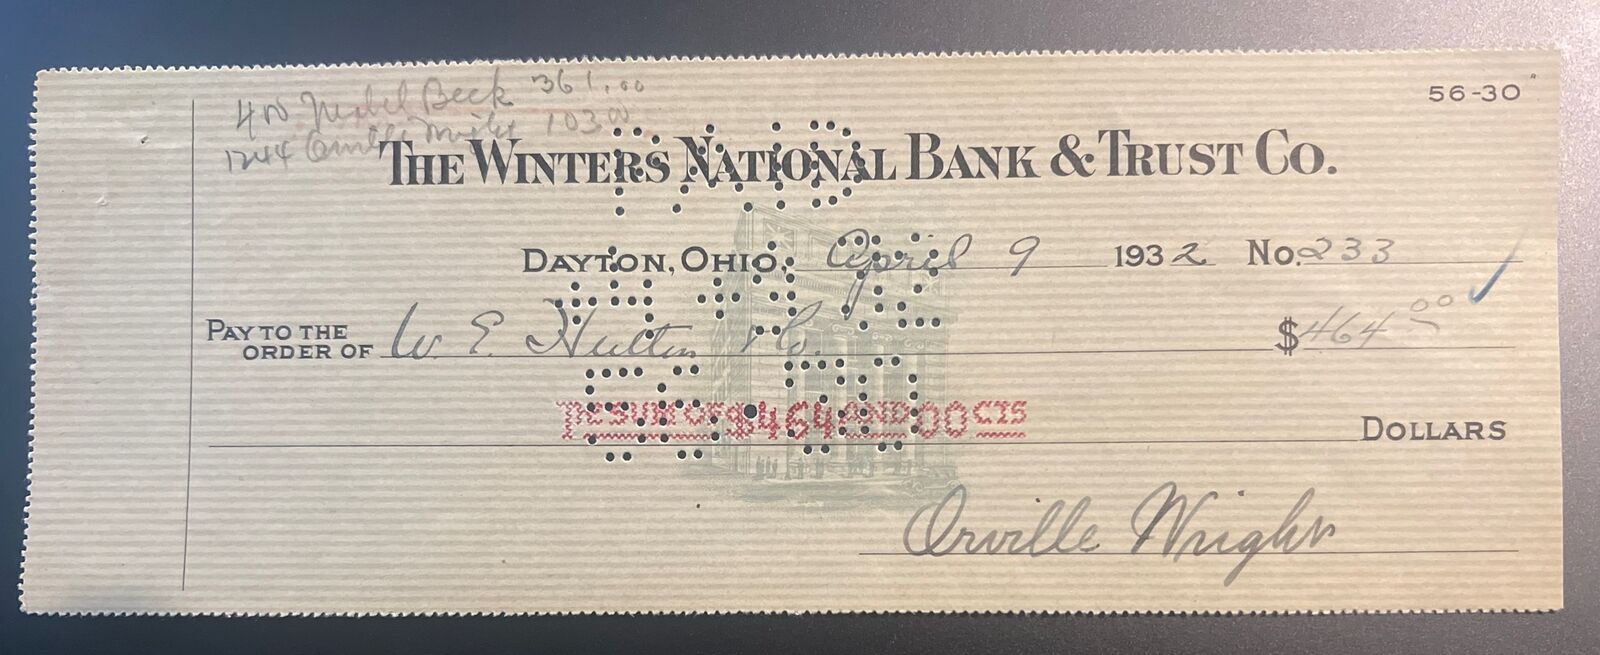 Orville Wright 1932 Bank Check Signed - Great Autograph - Twice Signed